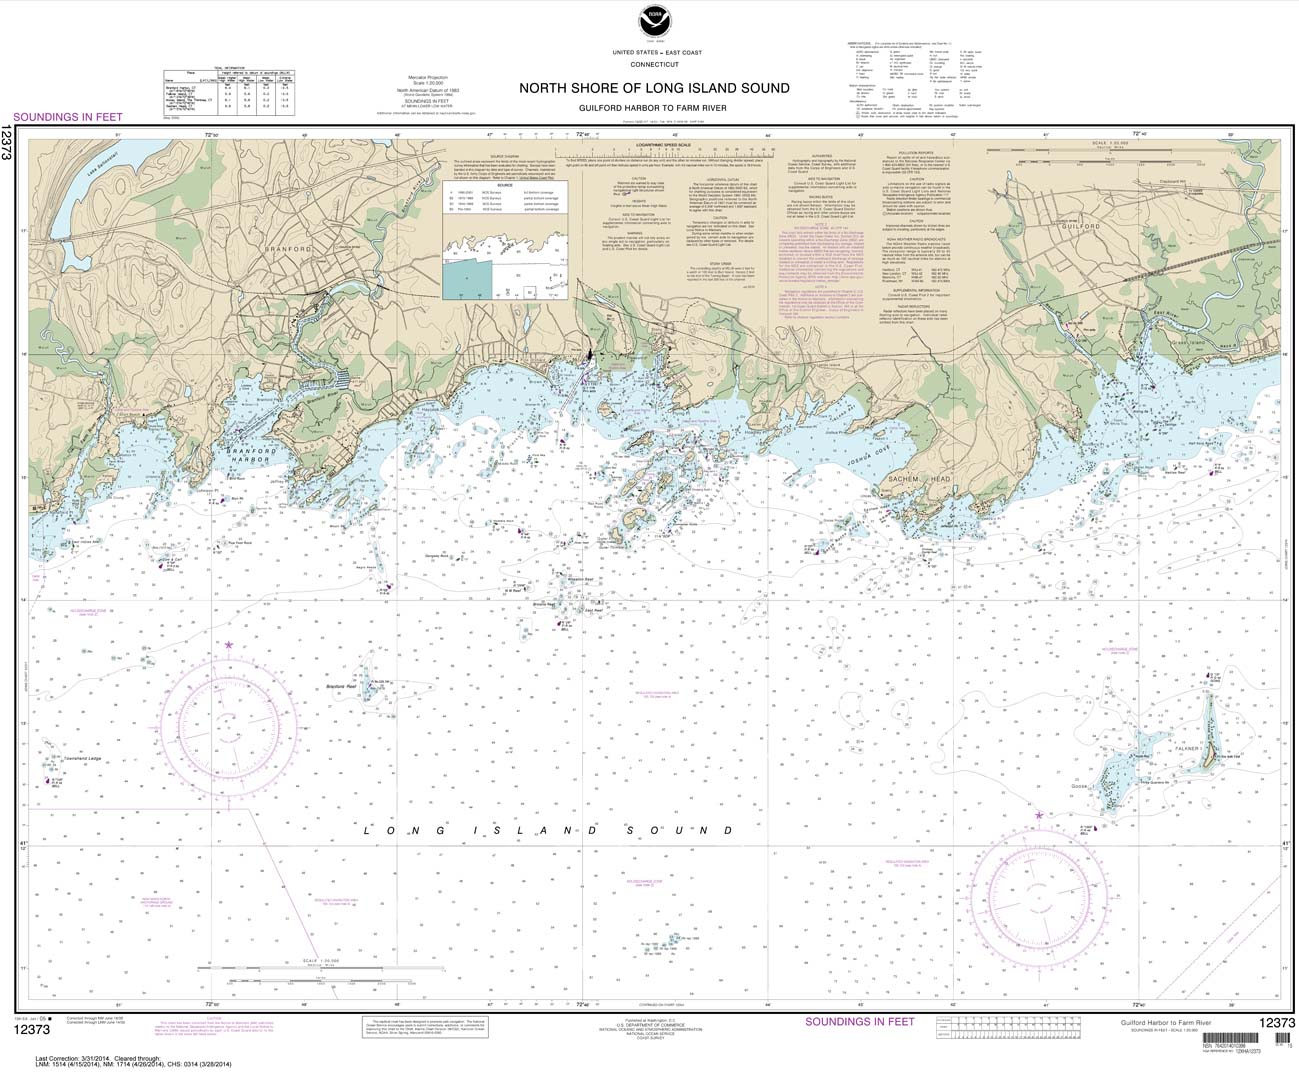 HISTORICAL NOAA Chart 12373: North Shore of Long Island Sound Guilford Harbor to Farm River